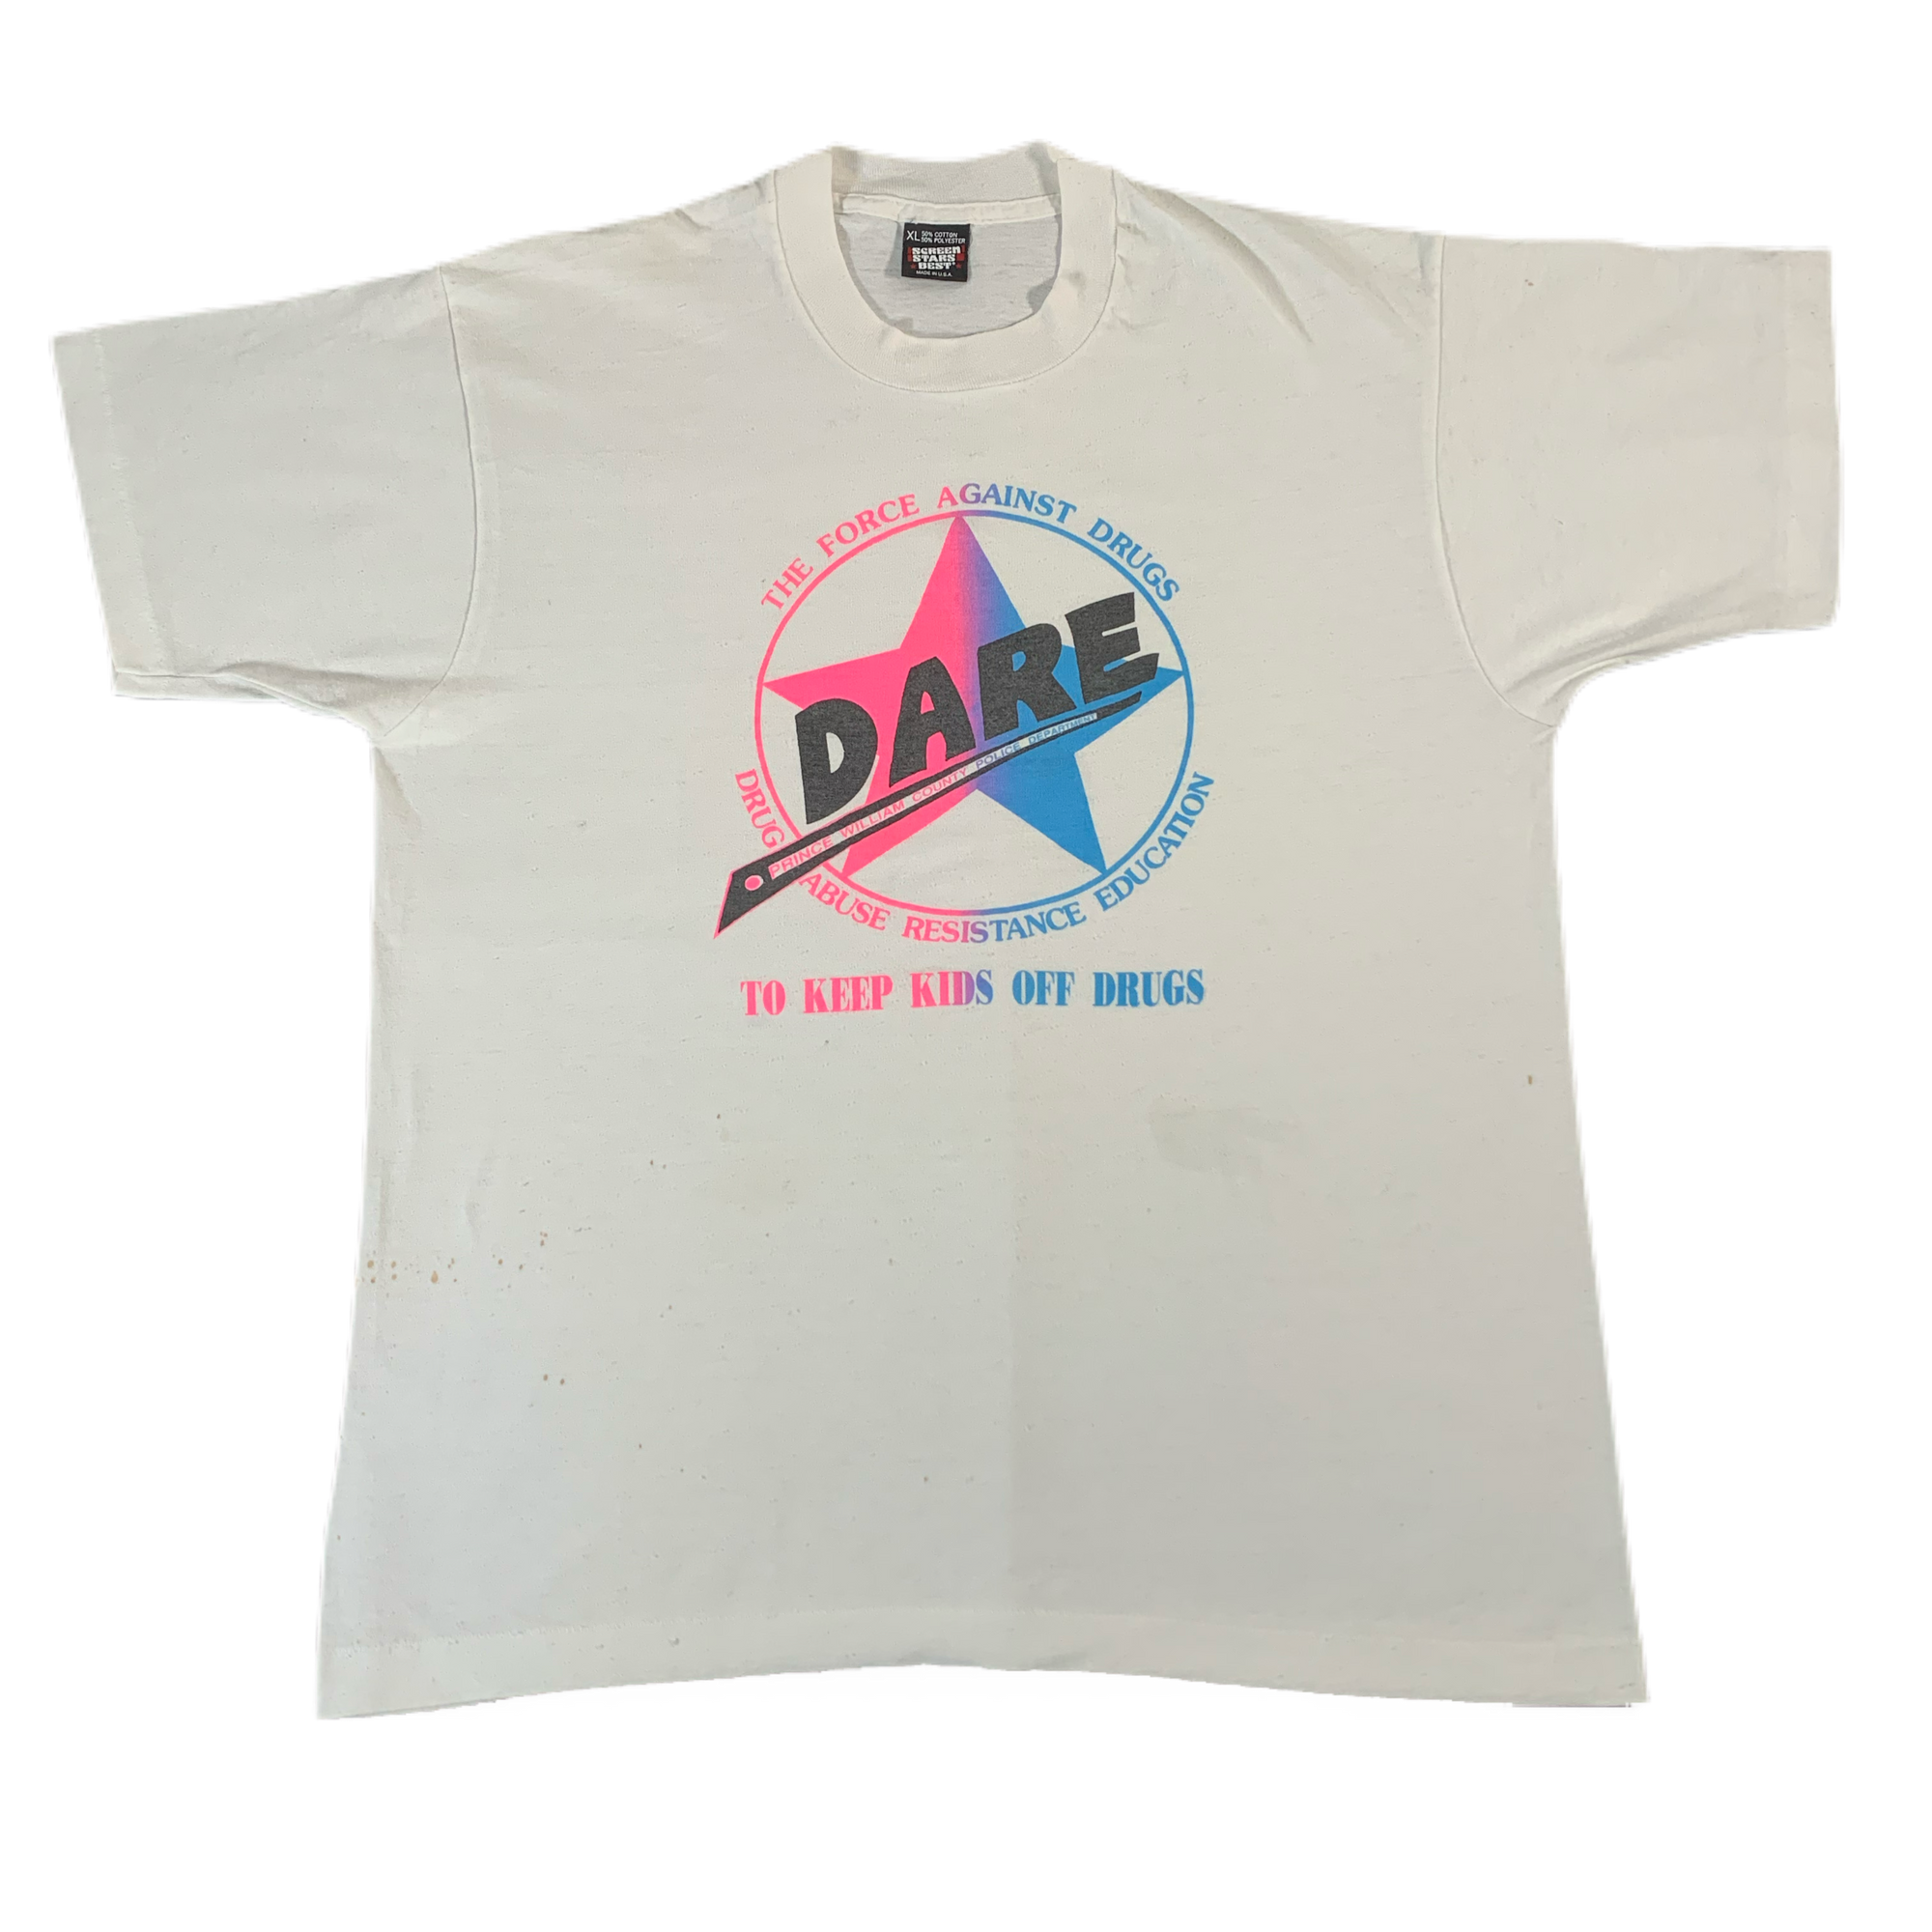 Vintage Dare “The Force Against Drugs” T-Shirt - jointcustodydc